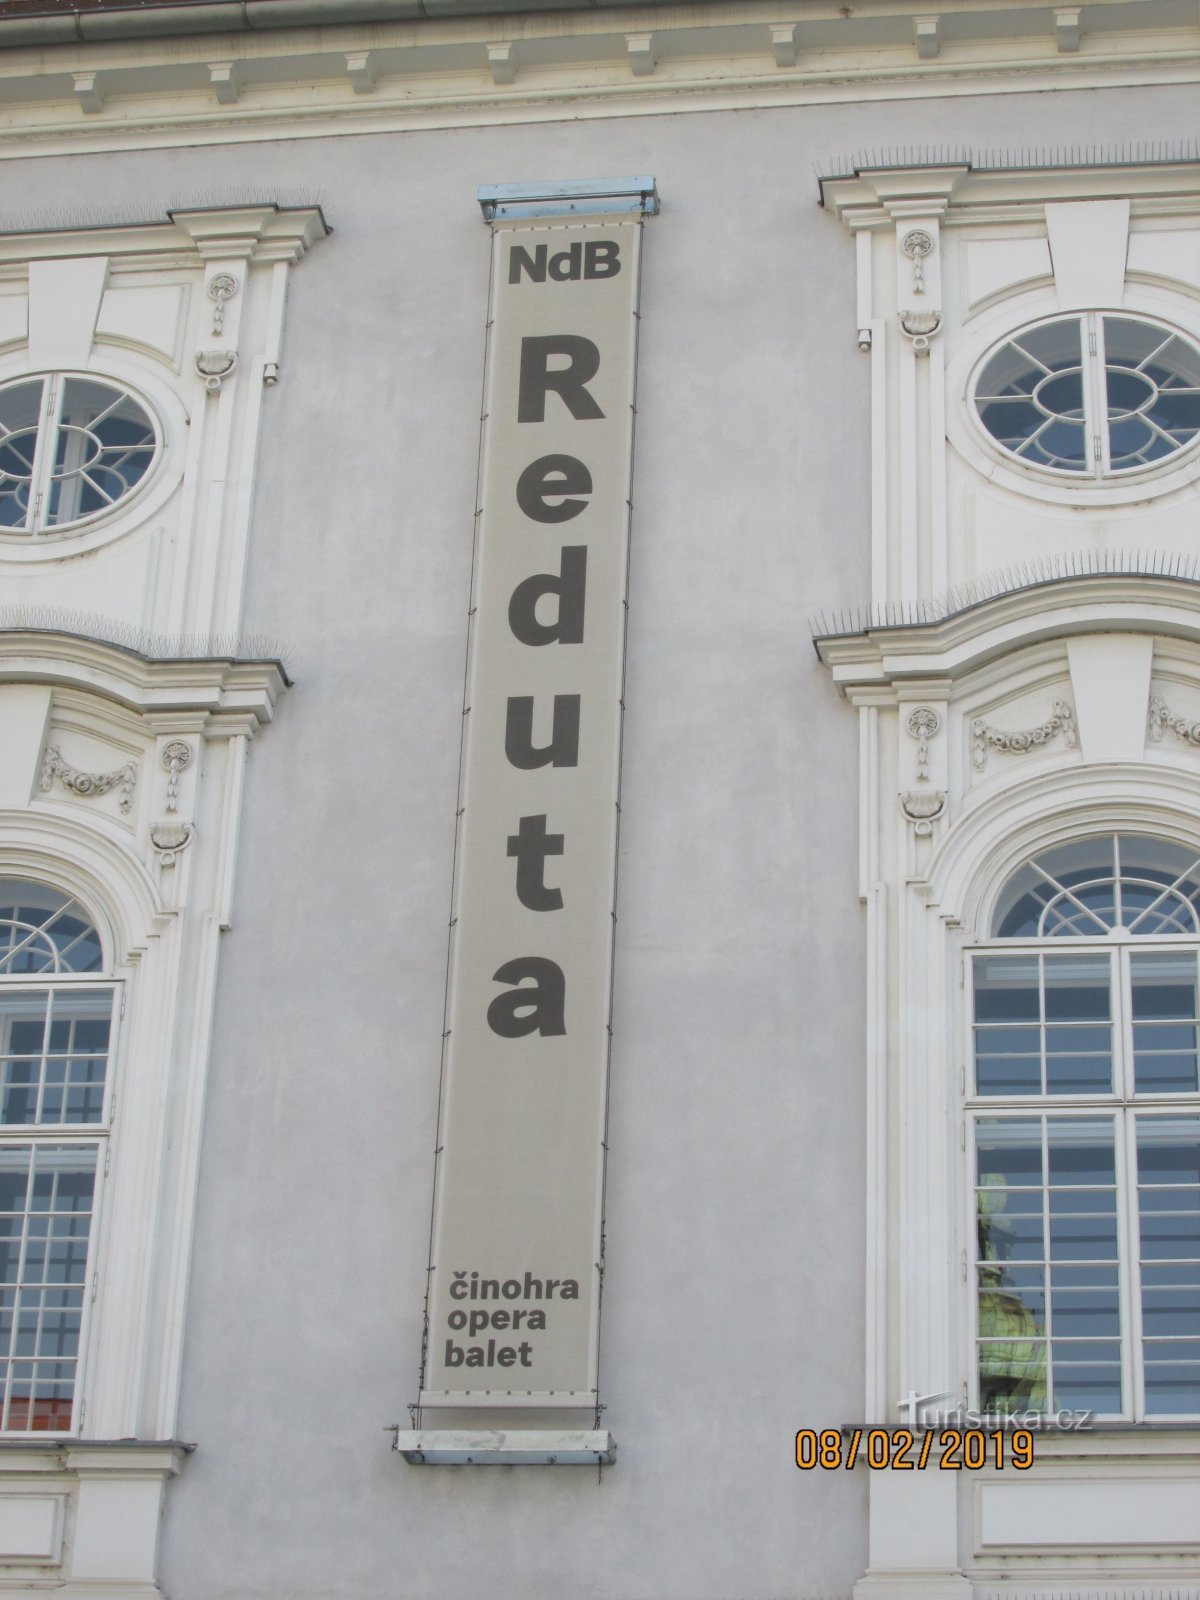 Reduta, the oldest theater building in Central Europe